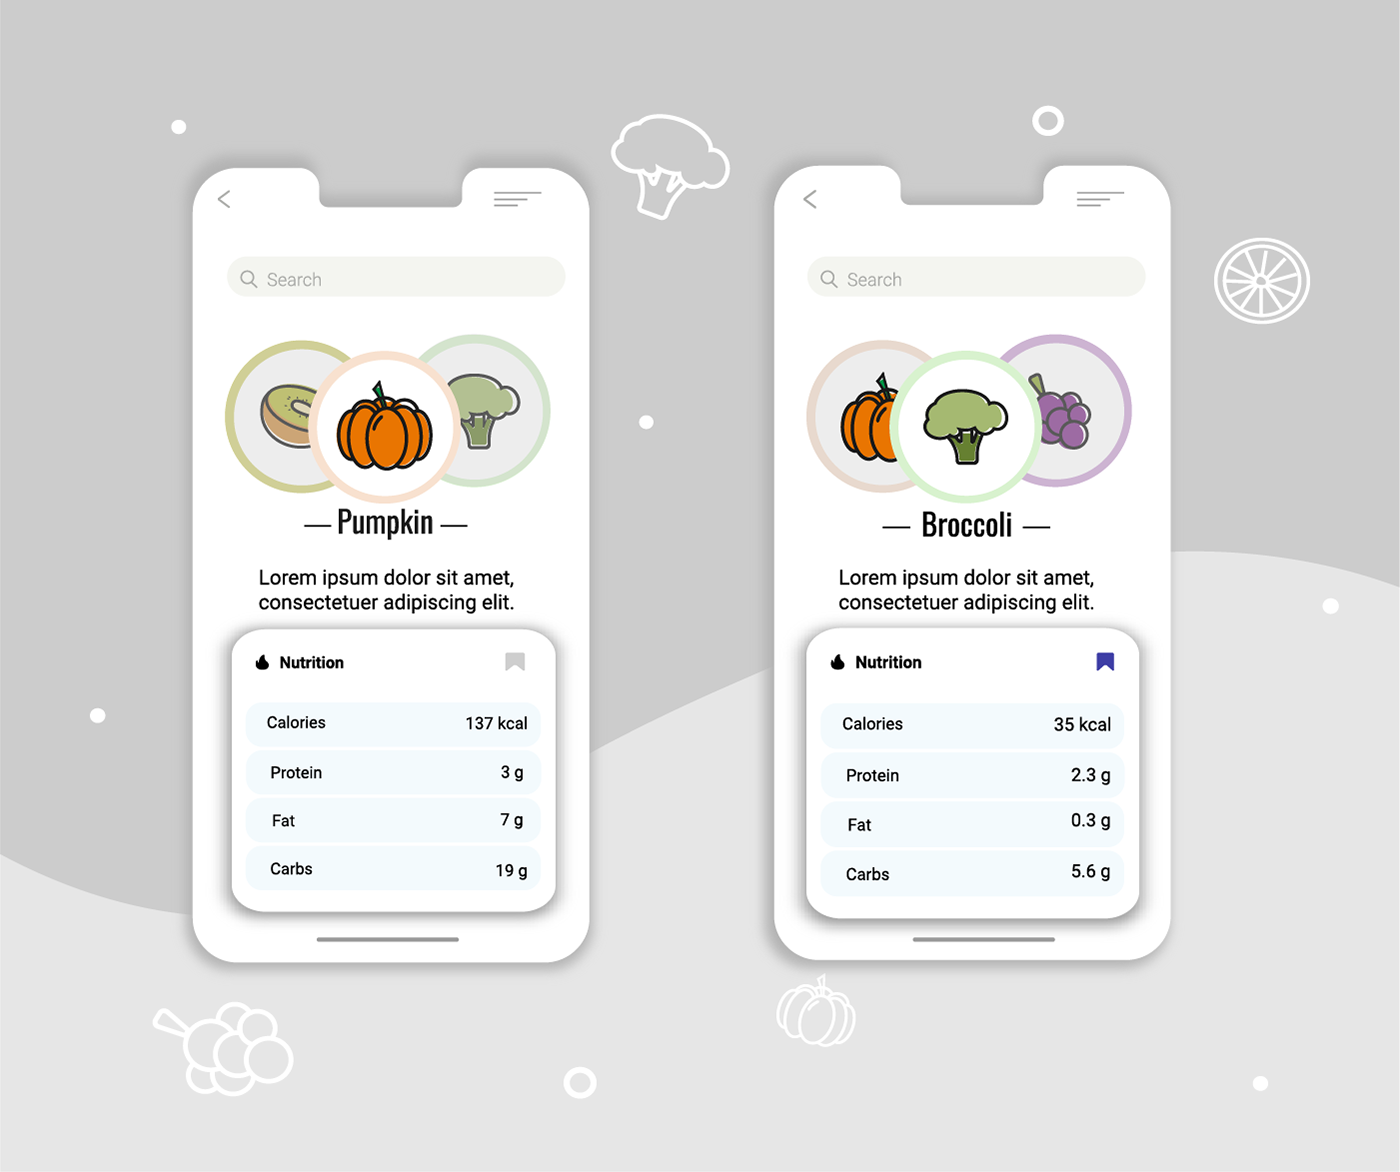 Food  vector healthy icons LineIcon